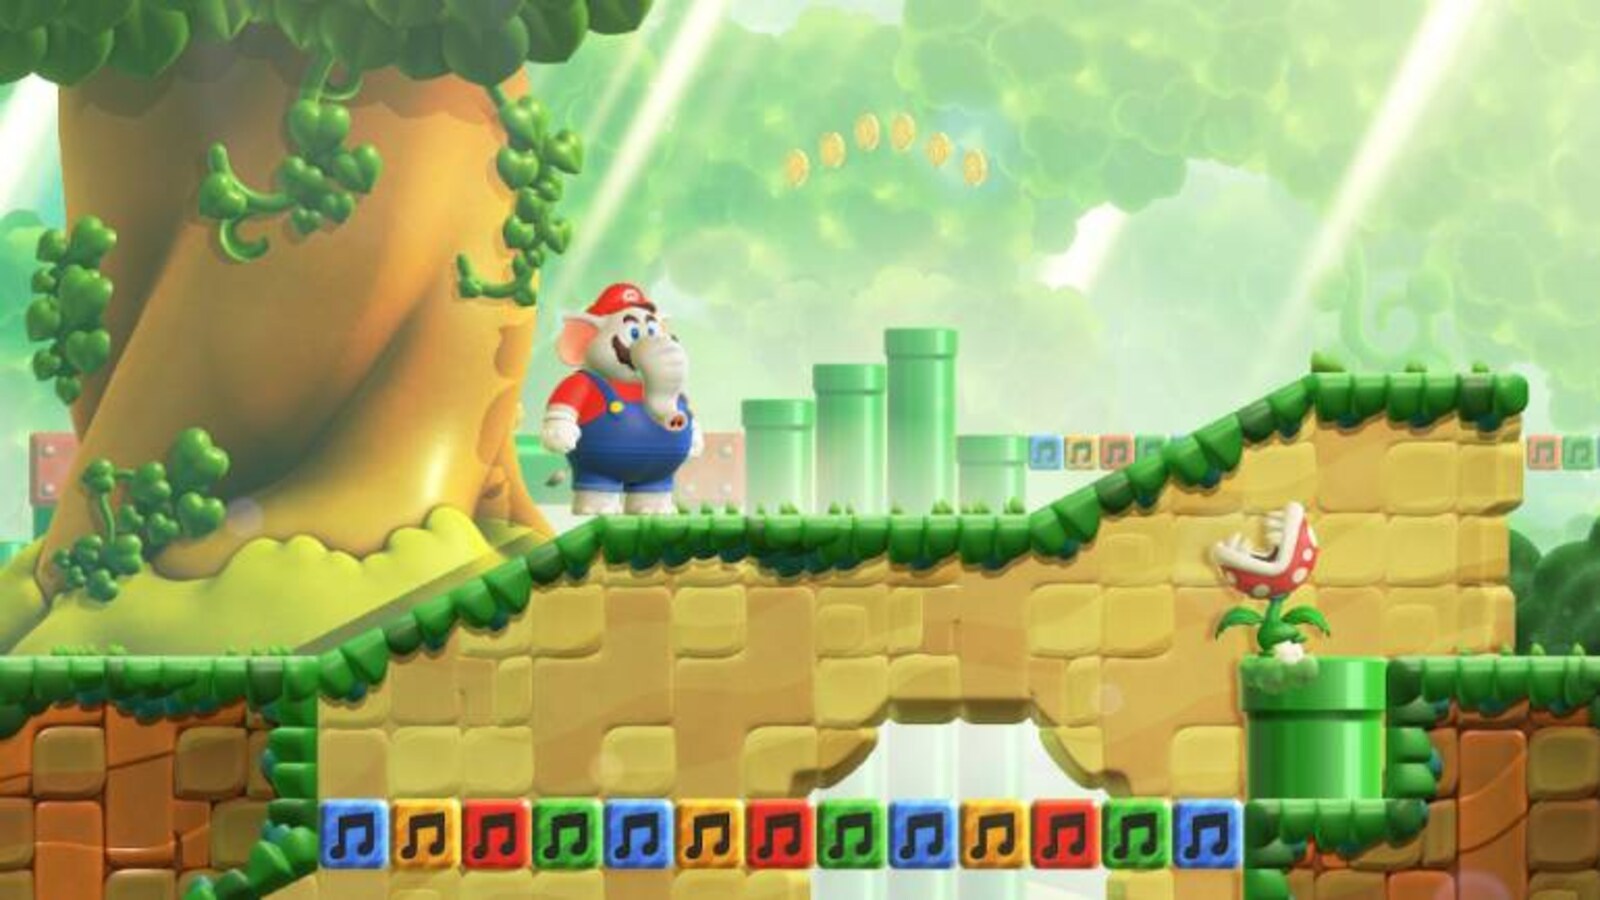 Super Mario Bros Wonder review: Magic of side-scrolling games revived